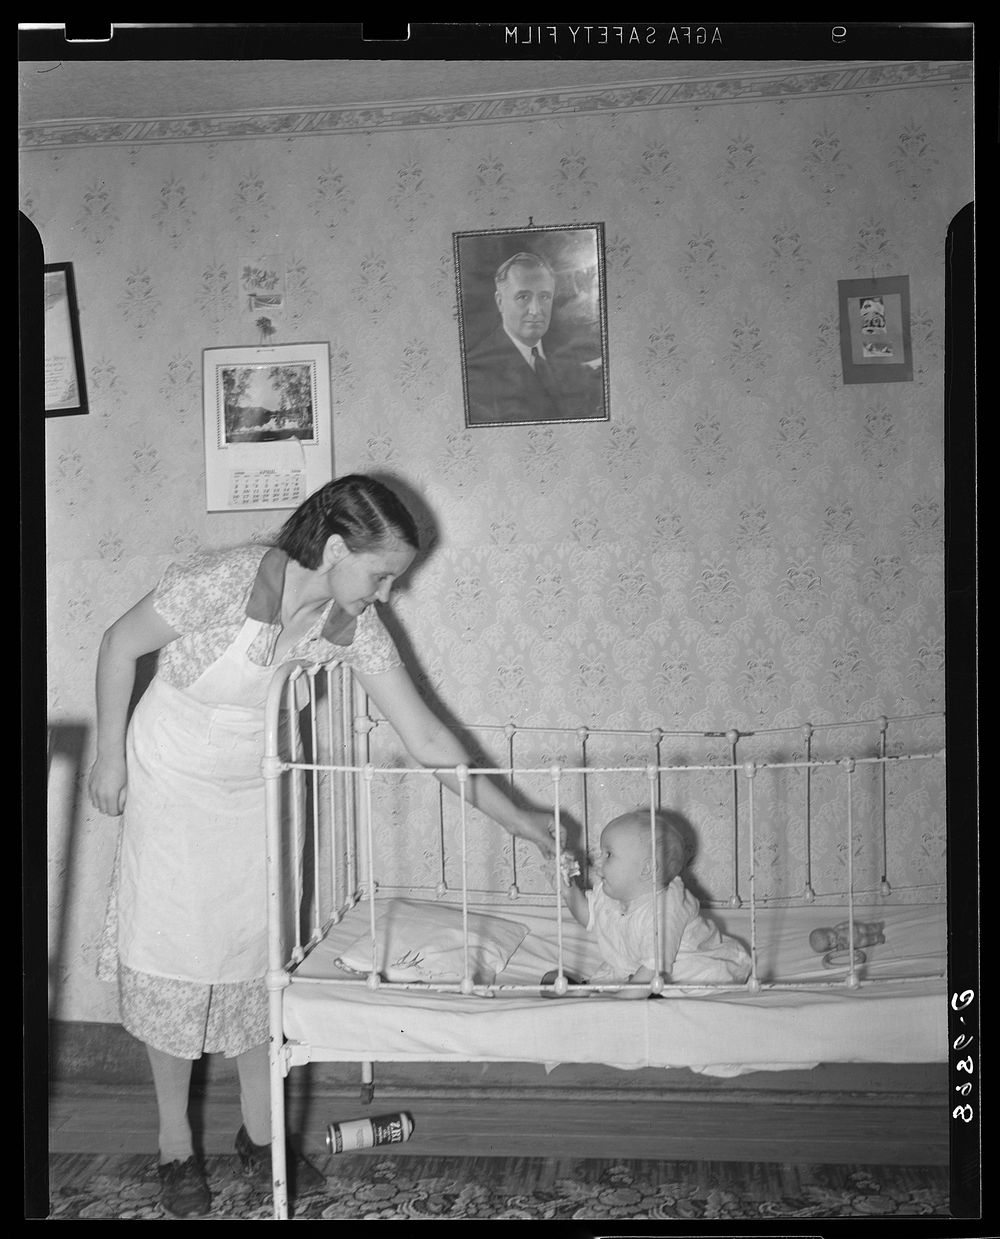 Mother and child. Kempton, West Virginia. Sourced from the Library of Congress.